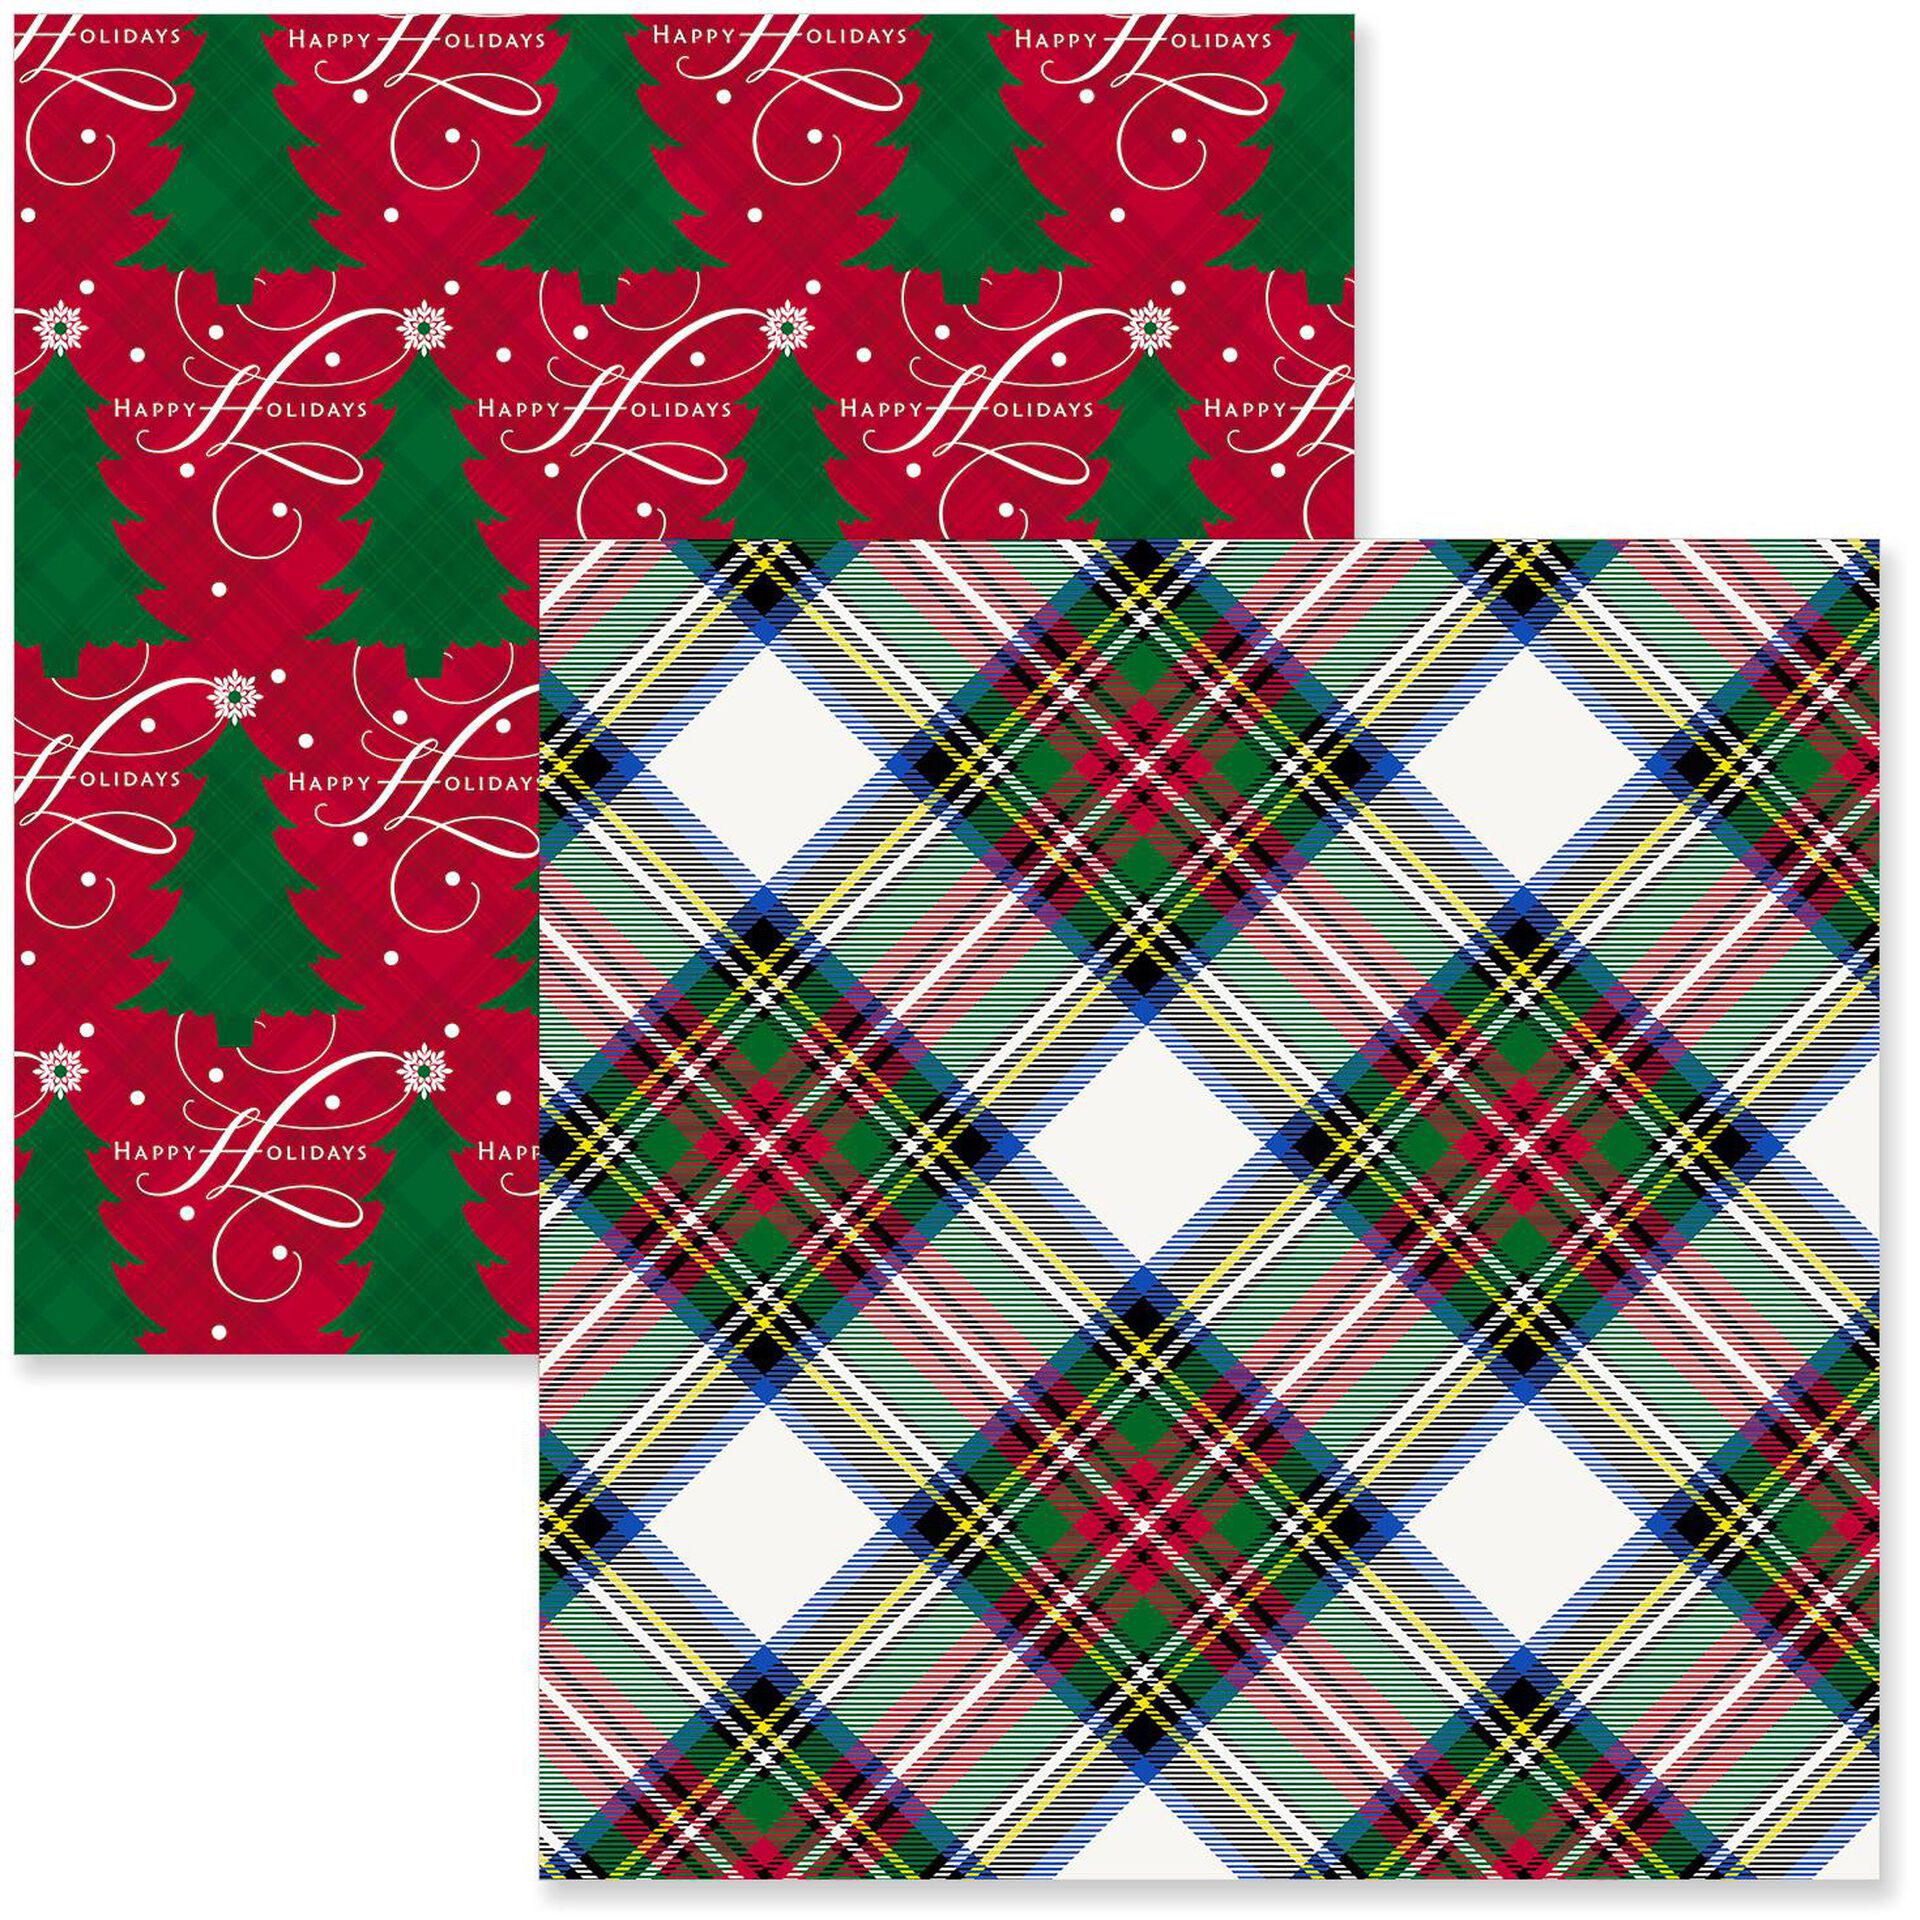 White Plaid/Christmas Trees Christmas Wrapping Paper Rolls, Pack of 2